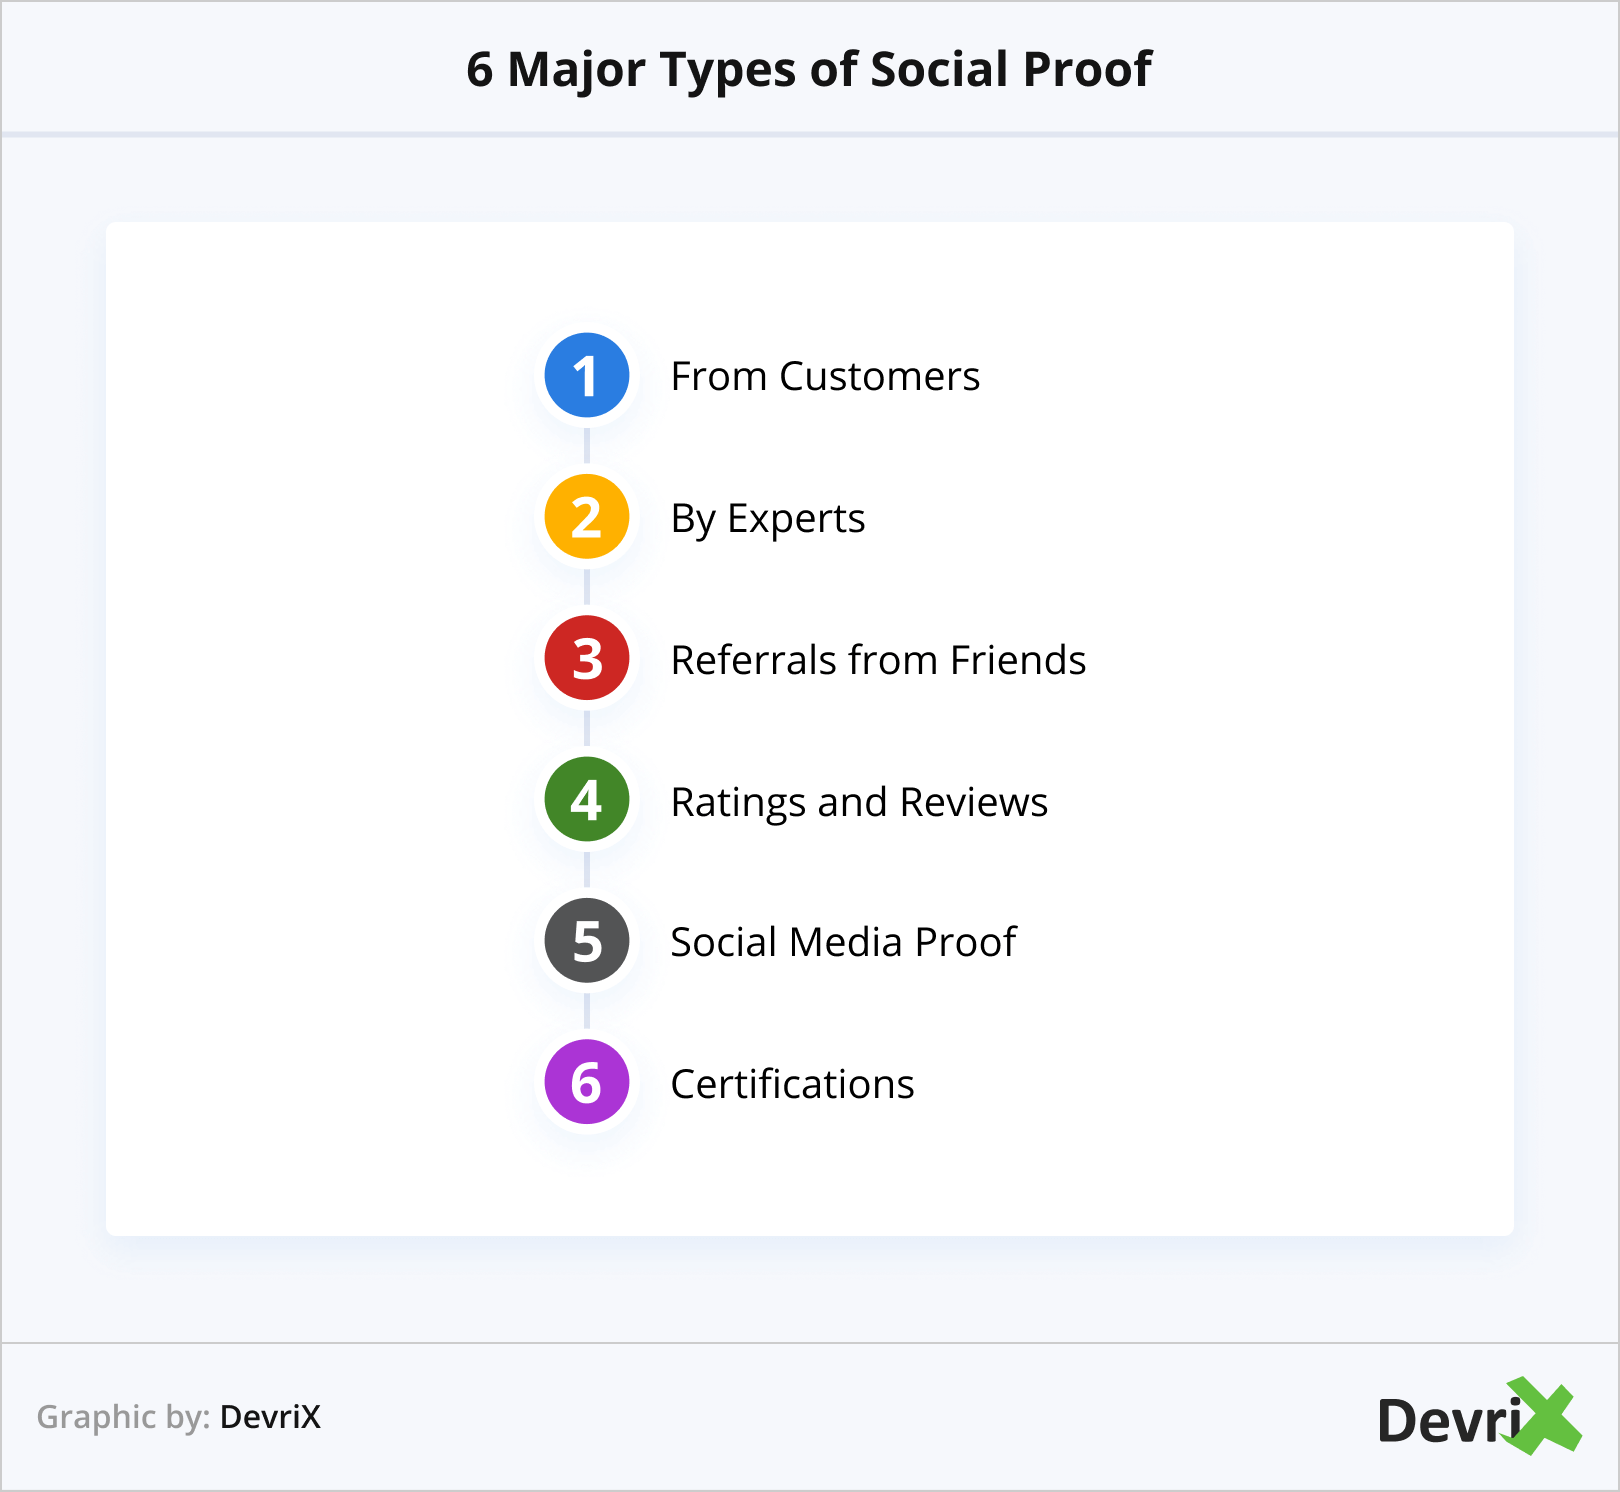 6 Major Types of Social Proof